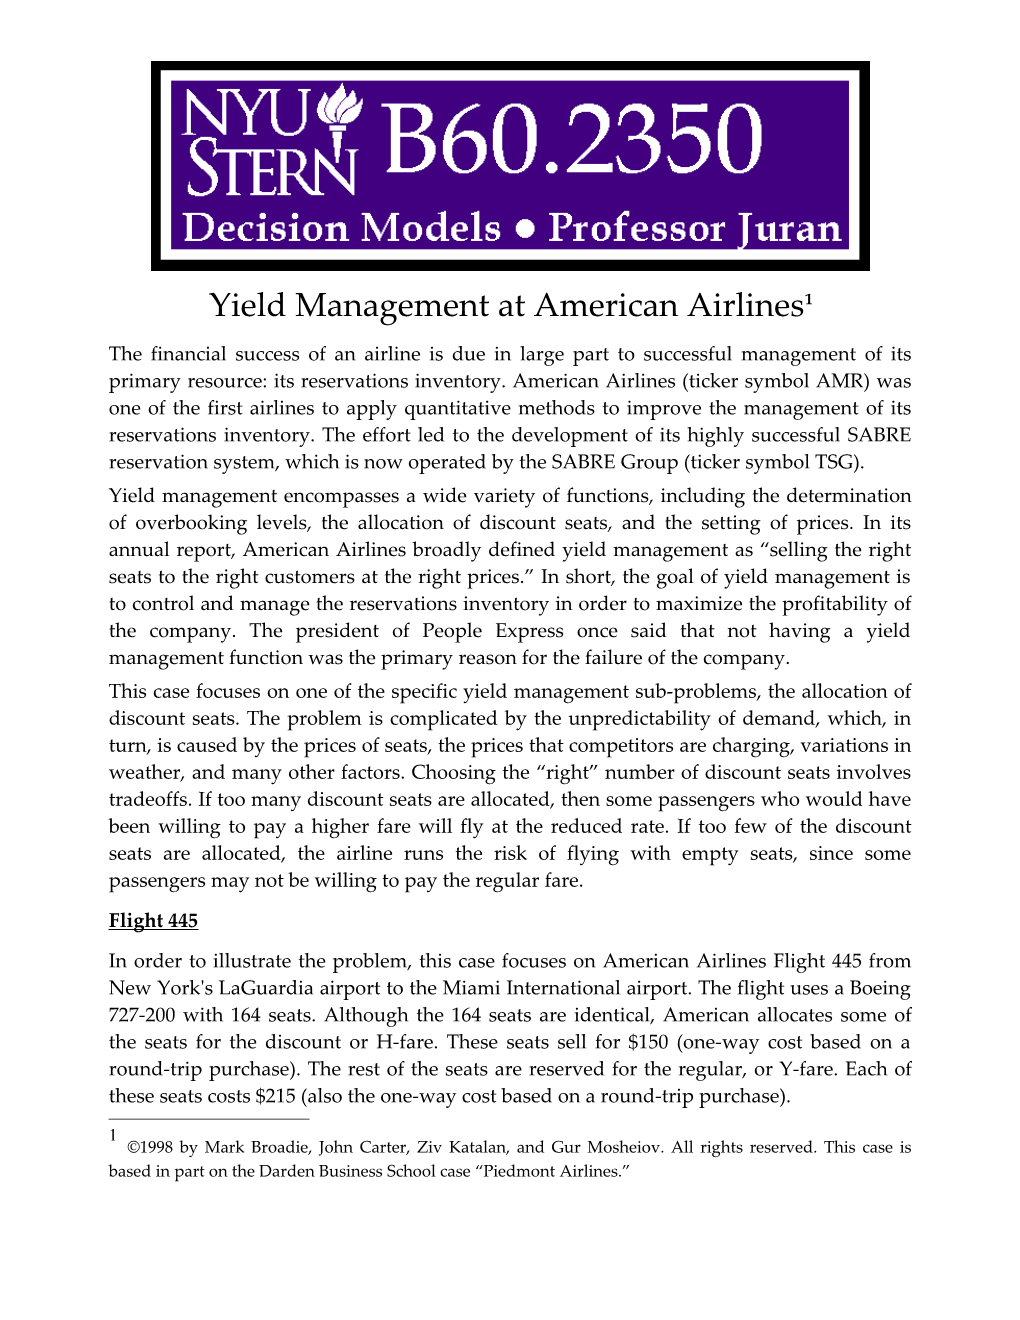 Yield Management at American Airlines 1